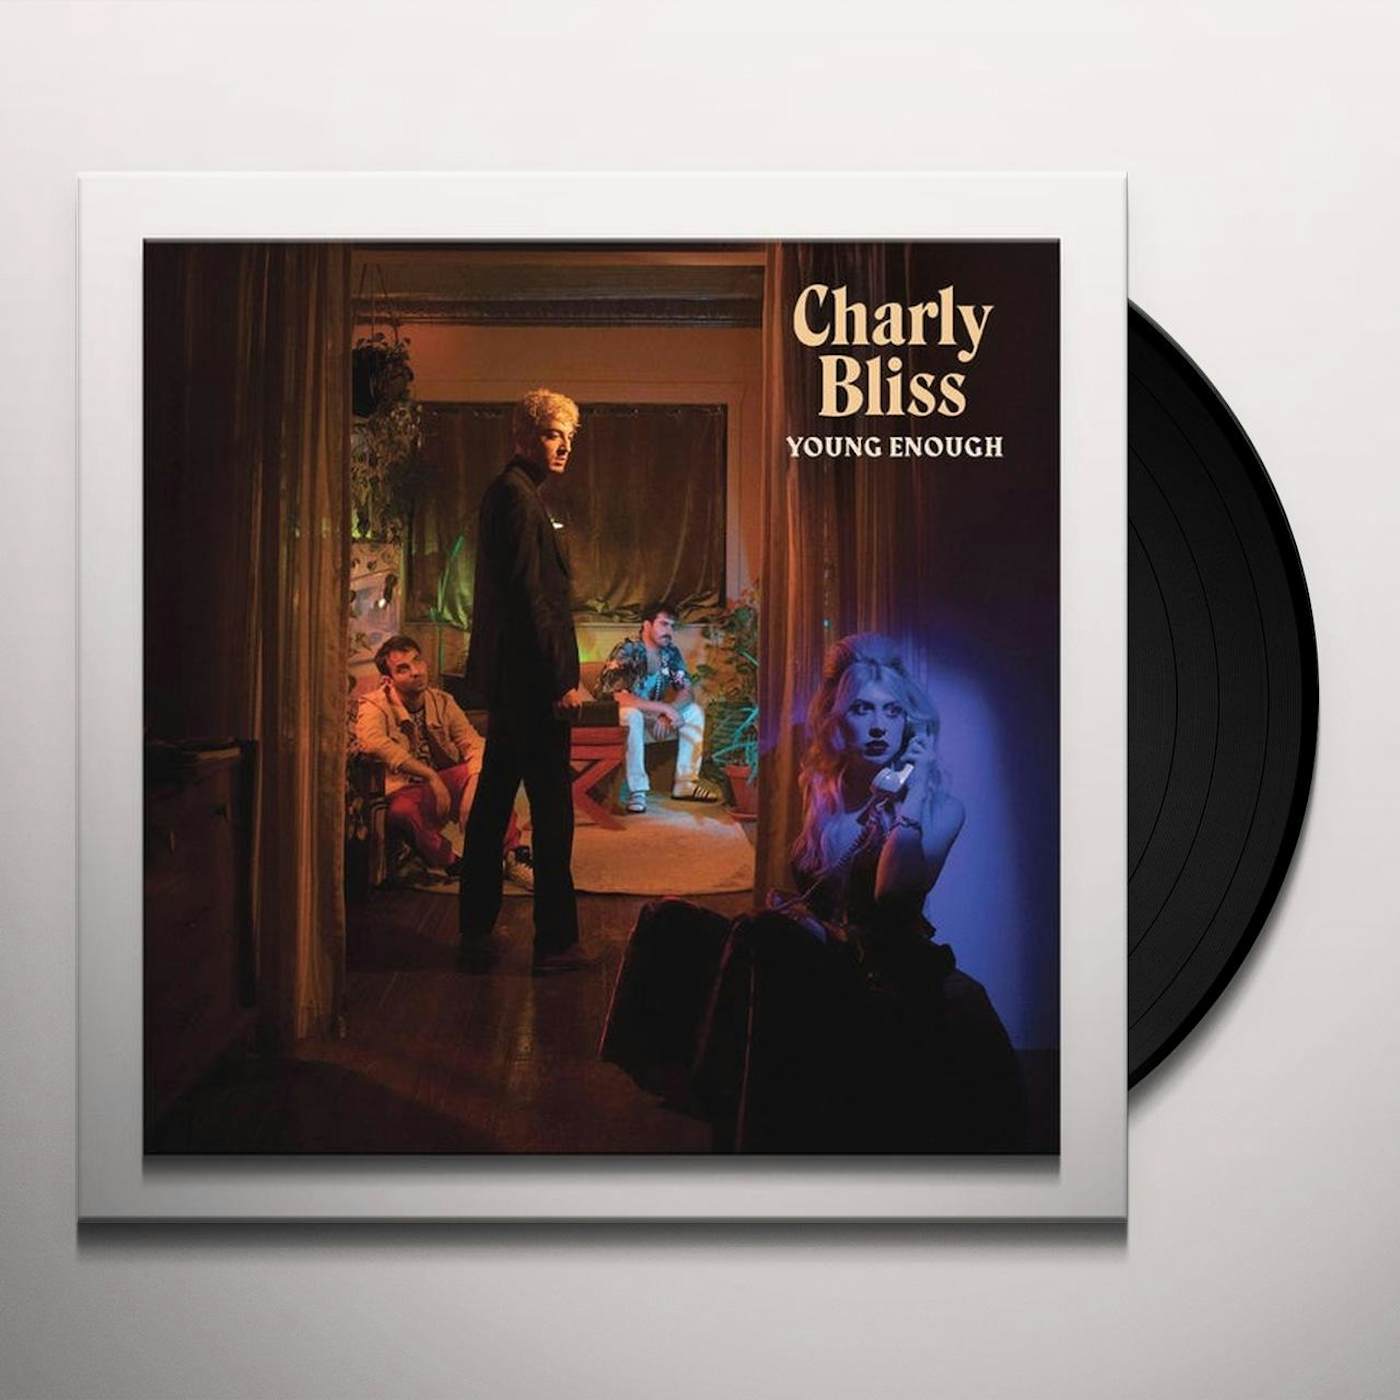 Charly Bliss YOUNG ENOUGH CD